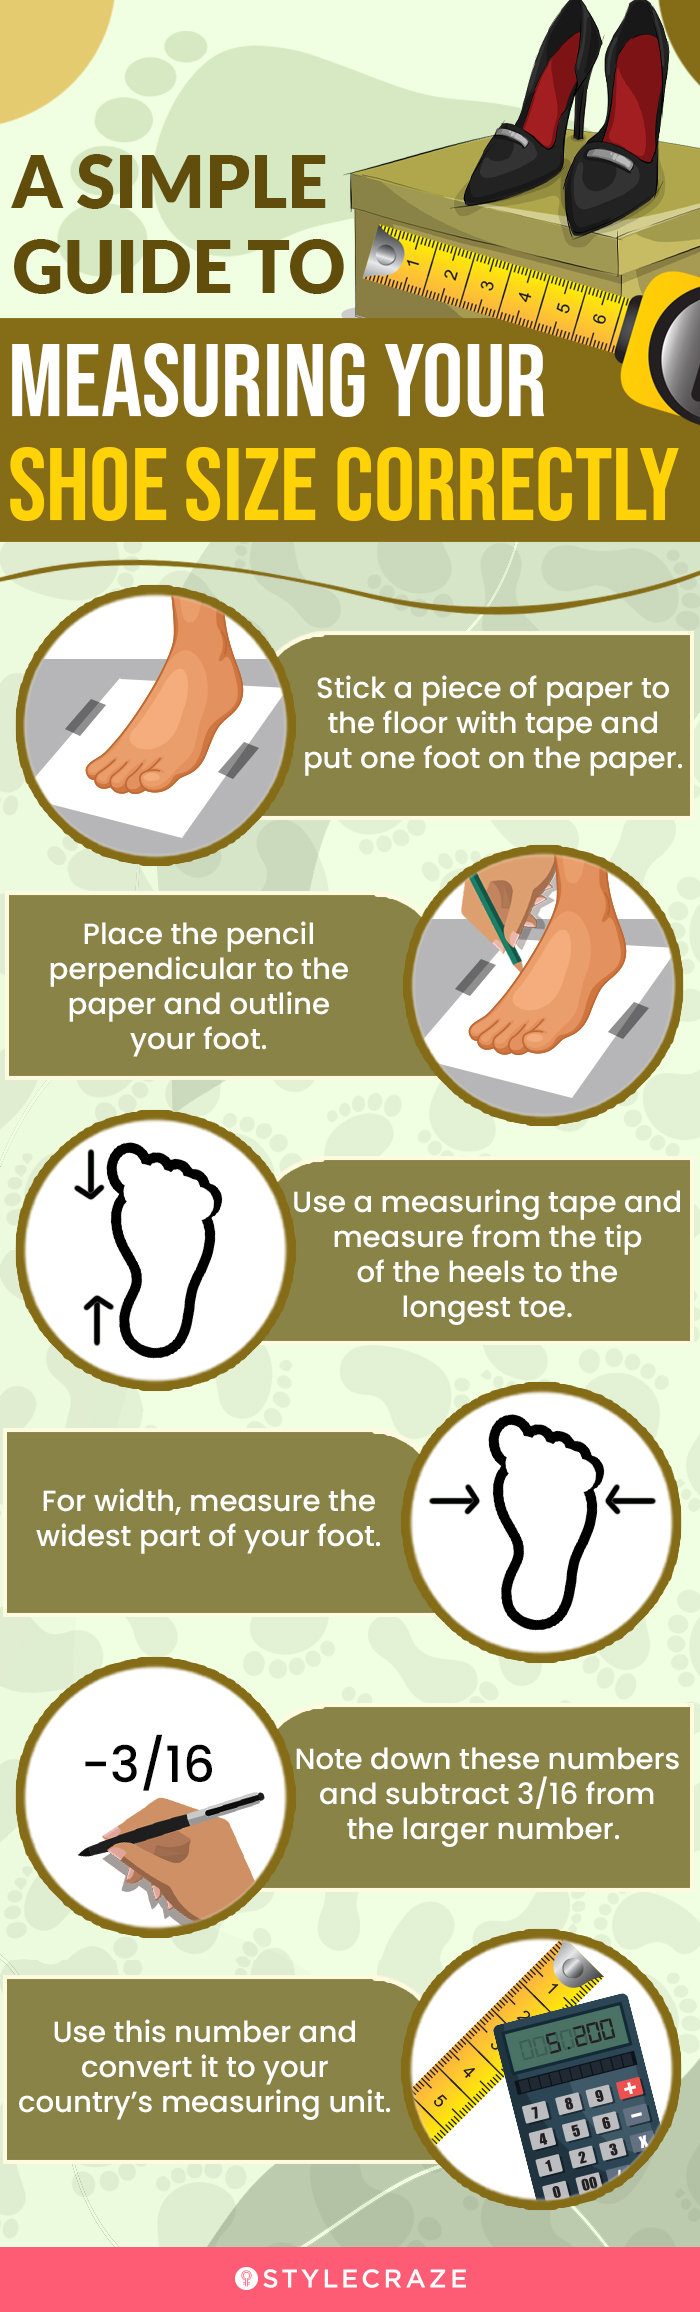 a simple guide to measuring your shoe size correctly (infographic)